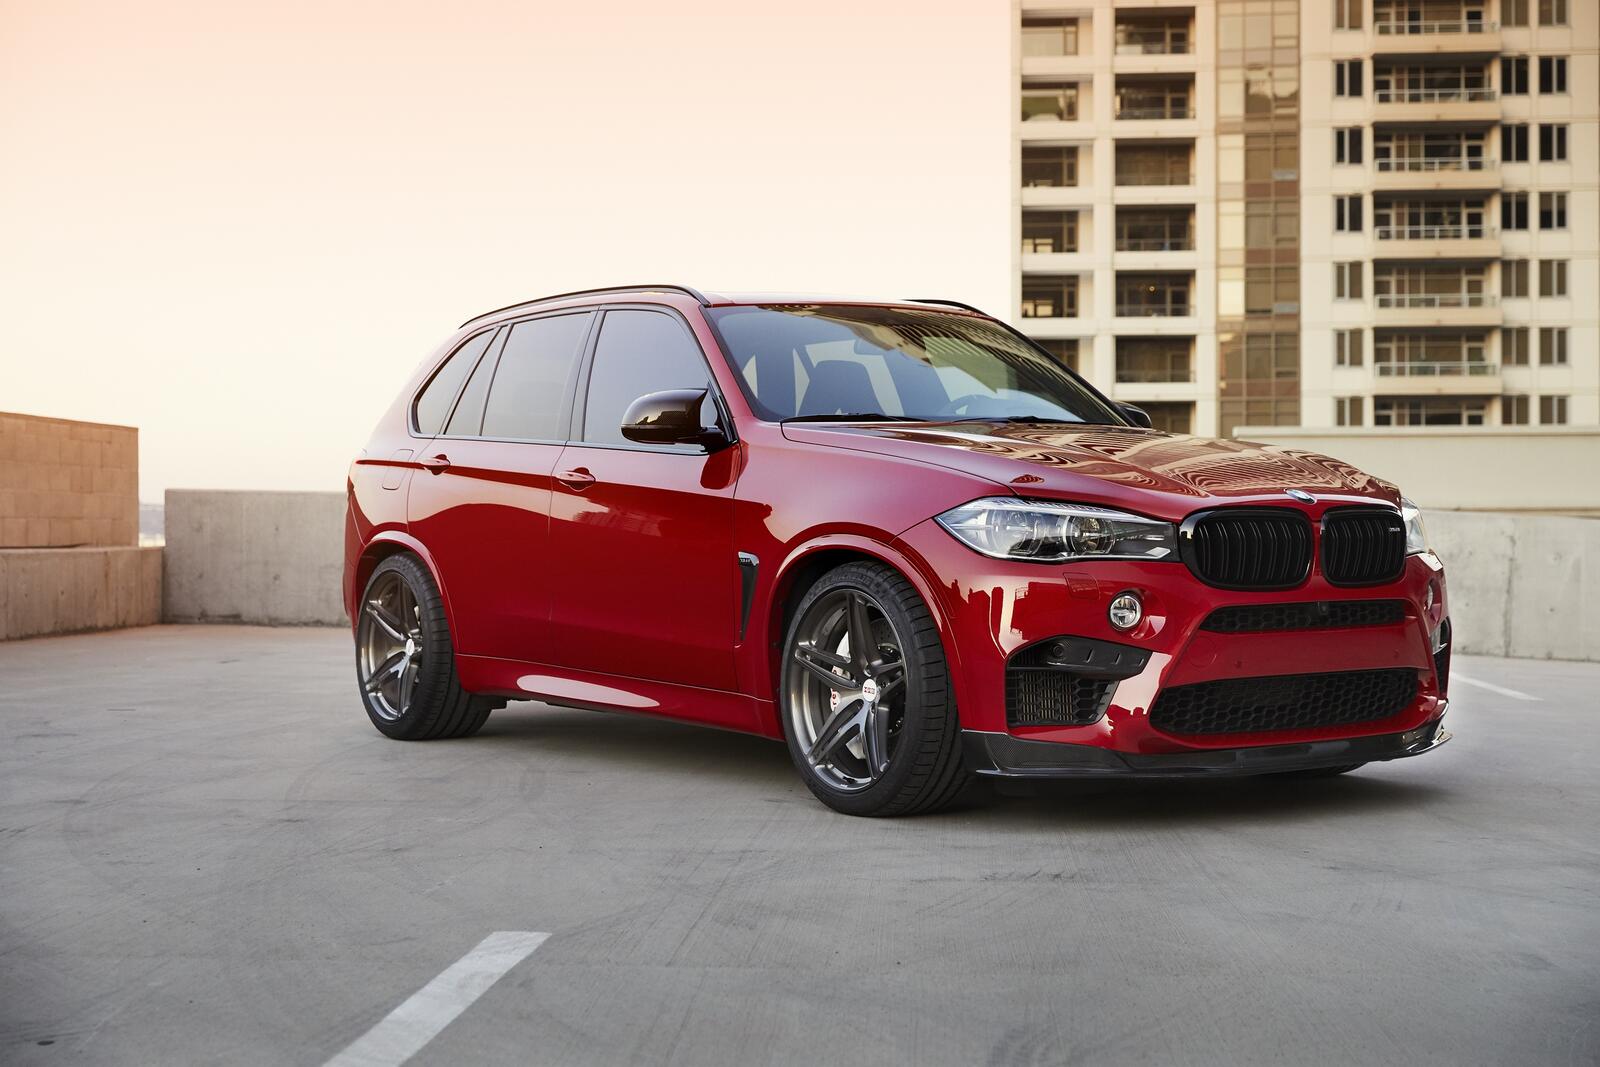 Wallpapers red luxury suv cars wallpaper bmw x5 on the desktop